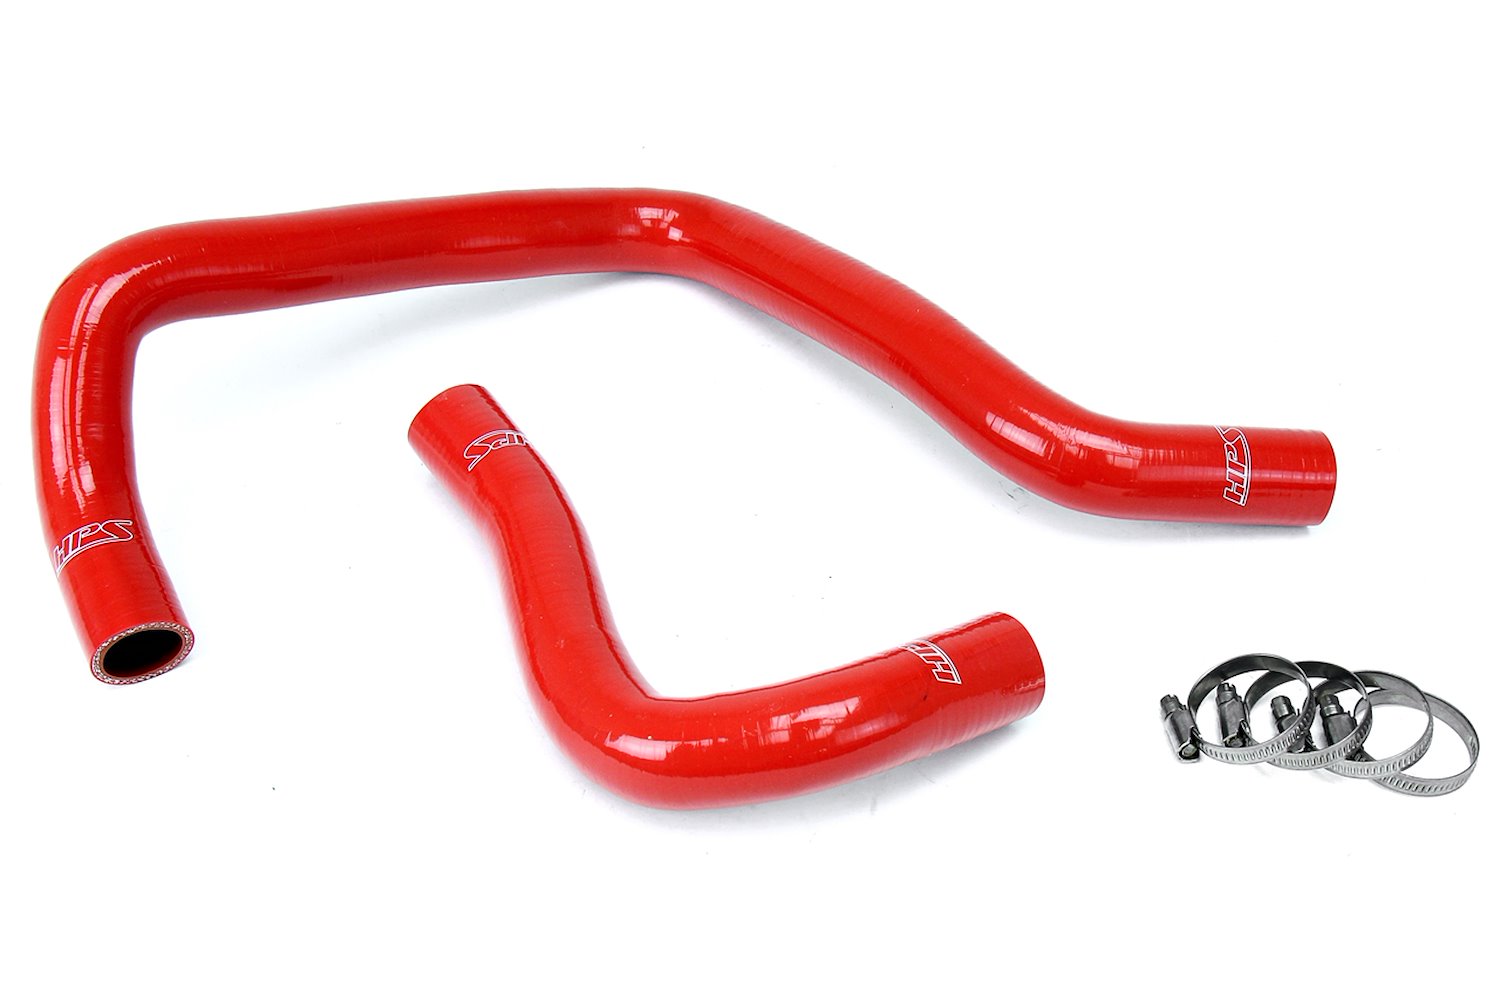 57-1003-RED Radiator Hose Kit, High-Temp 3-Ply Reinforced Silicone, Replace OEM Rubber Radiator Coolant Hoses